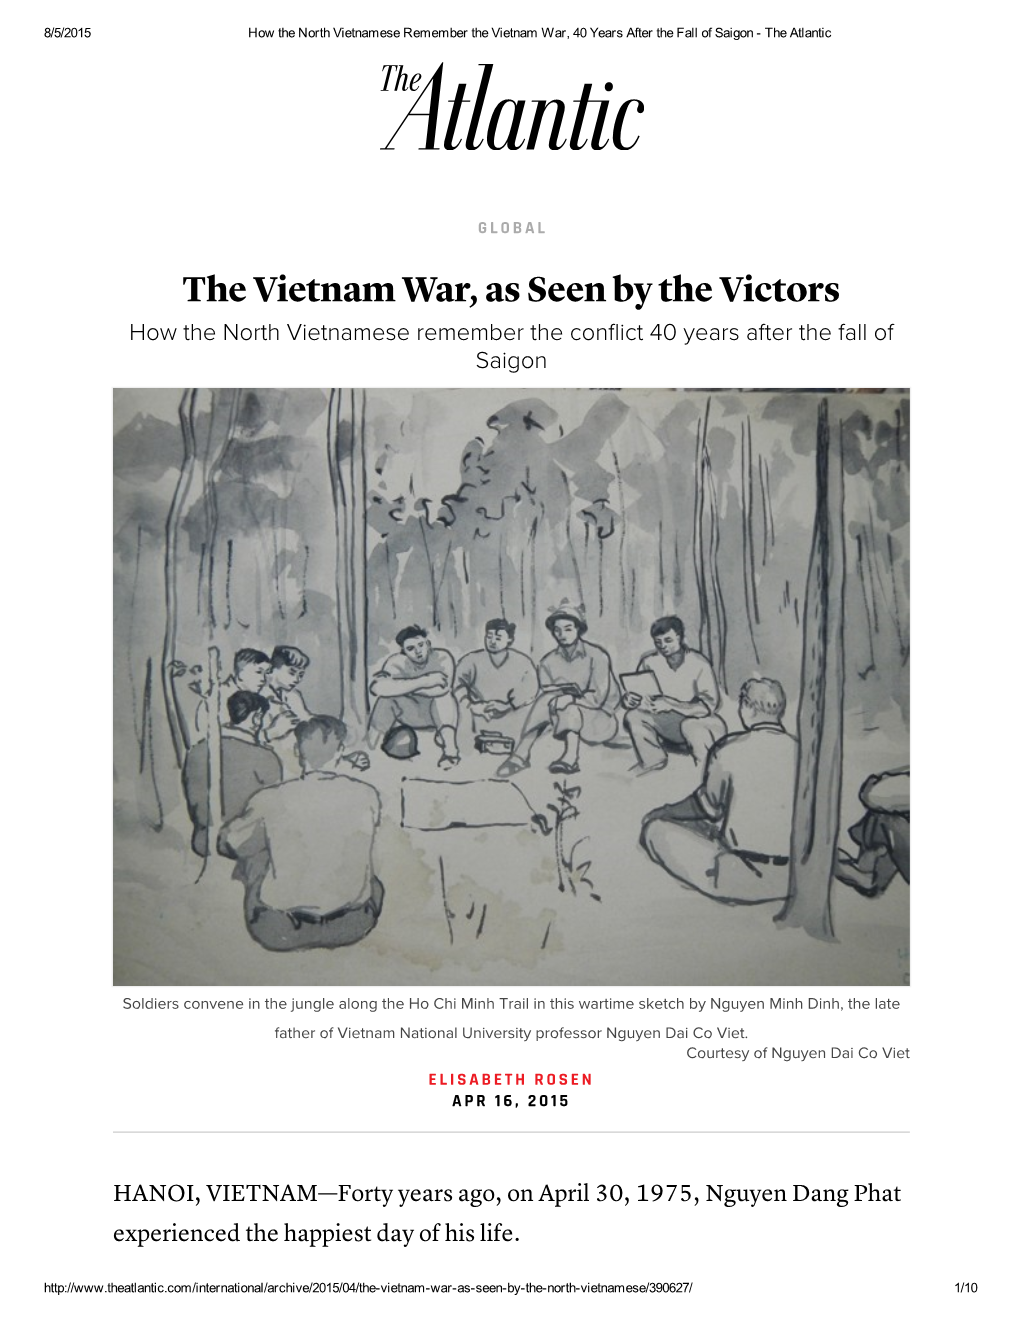 The Vietnam War, As Seen by the Victors How the North Vietnamese Remember the Conflict 40 Years After the Fall of Saigon